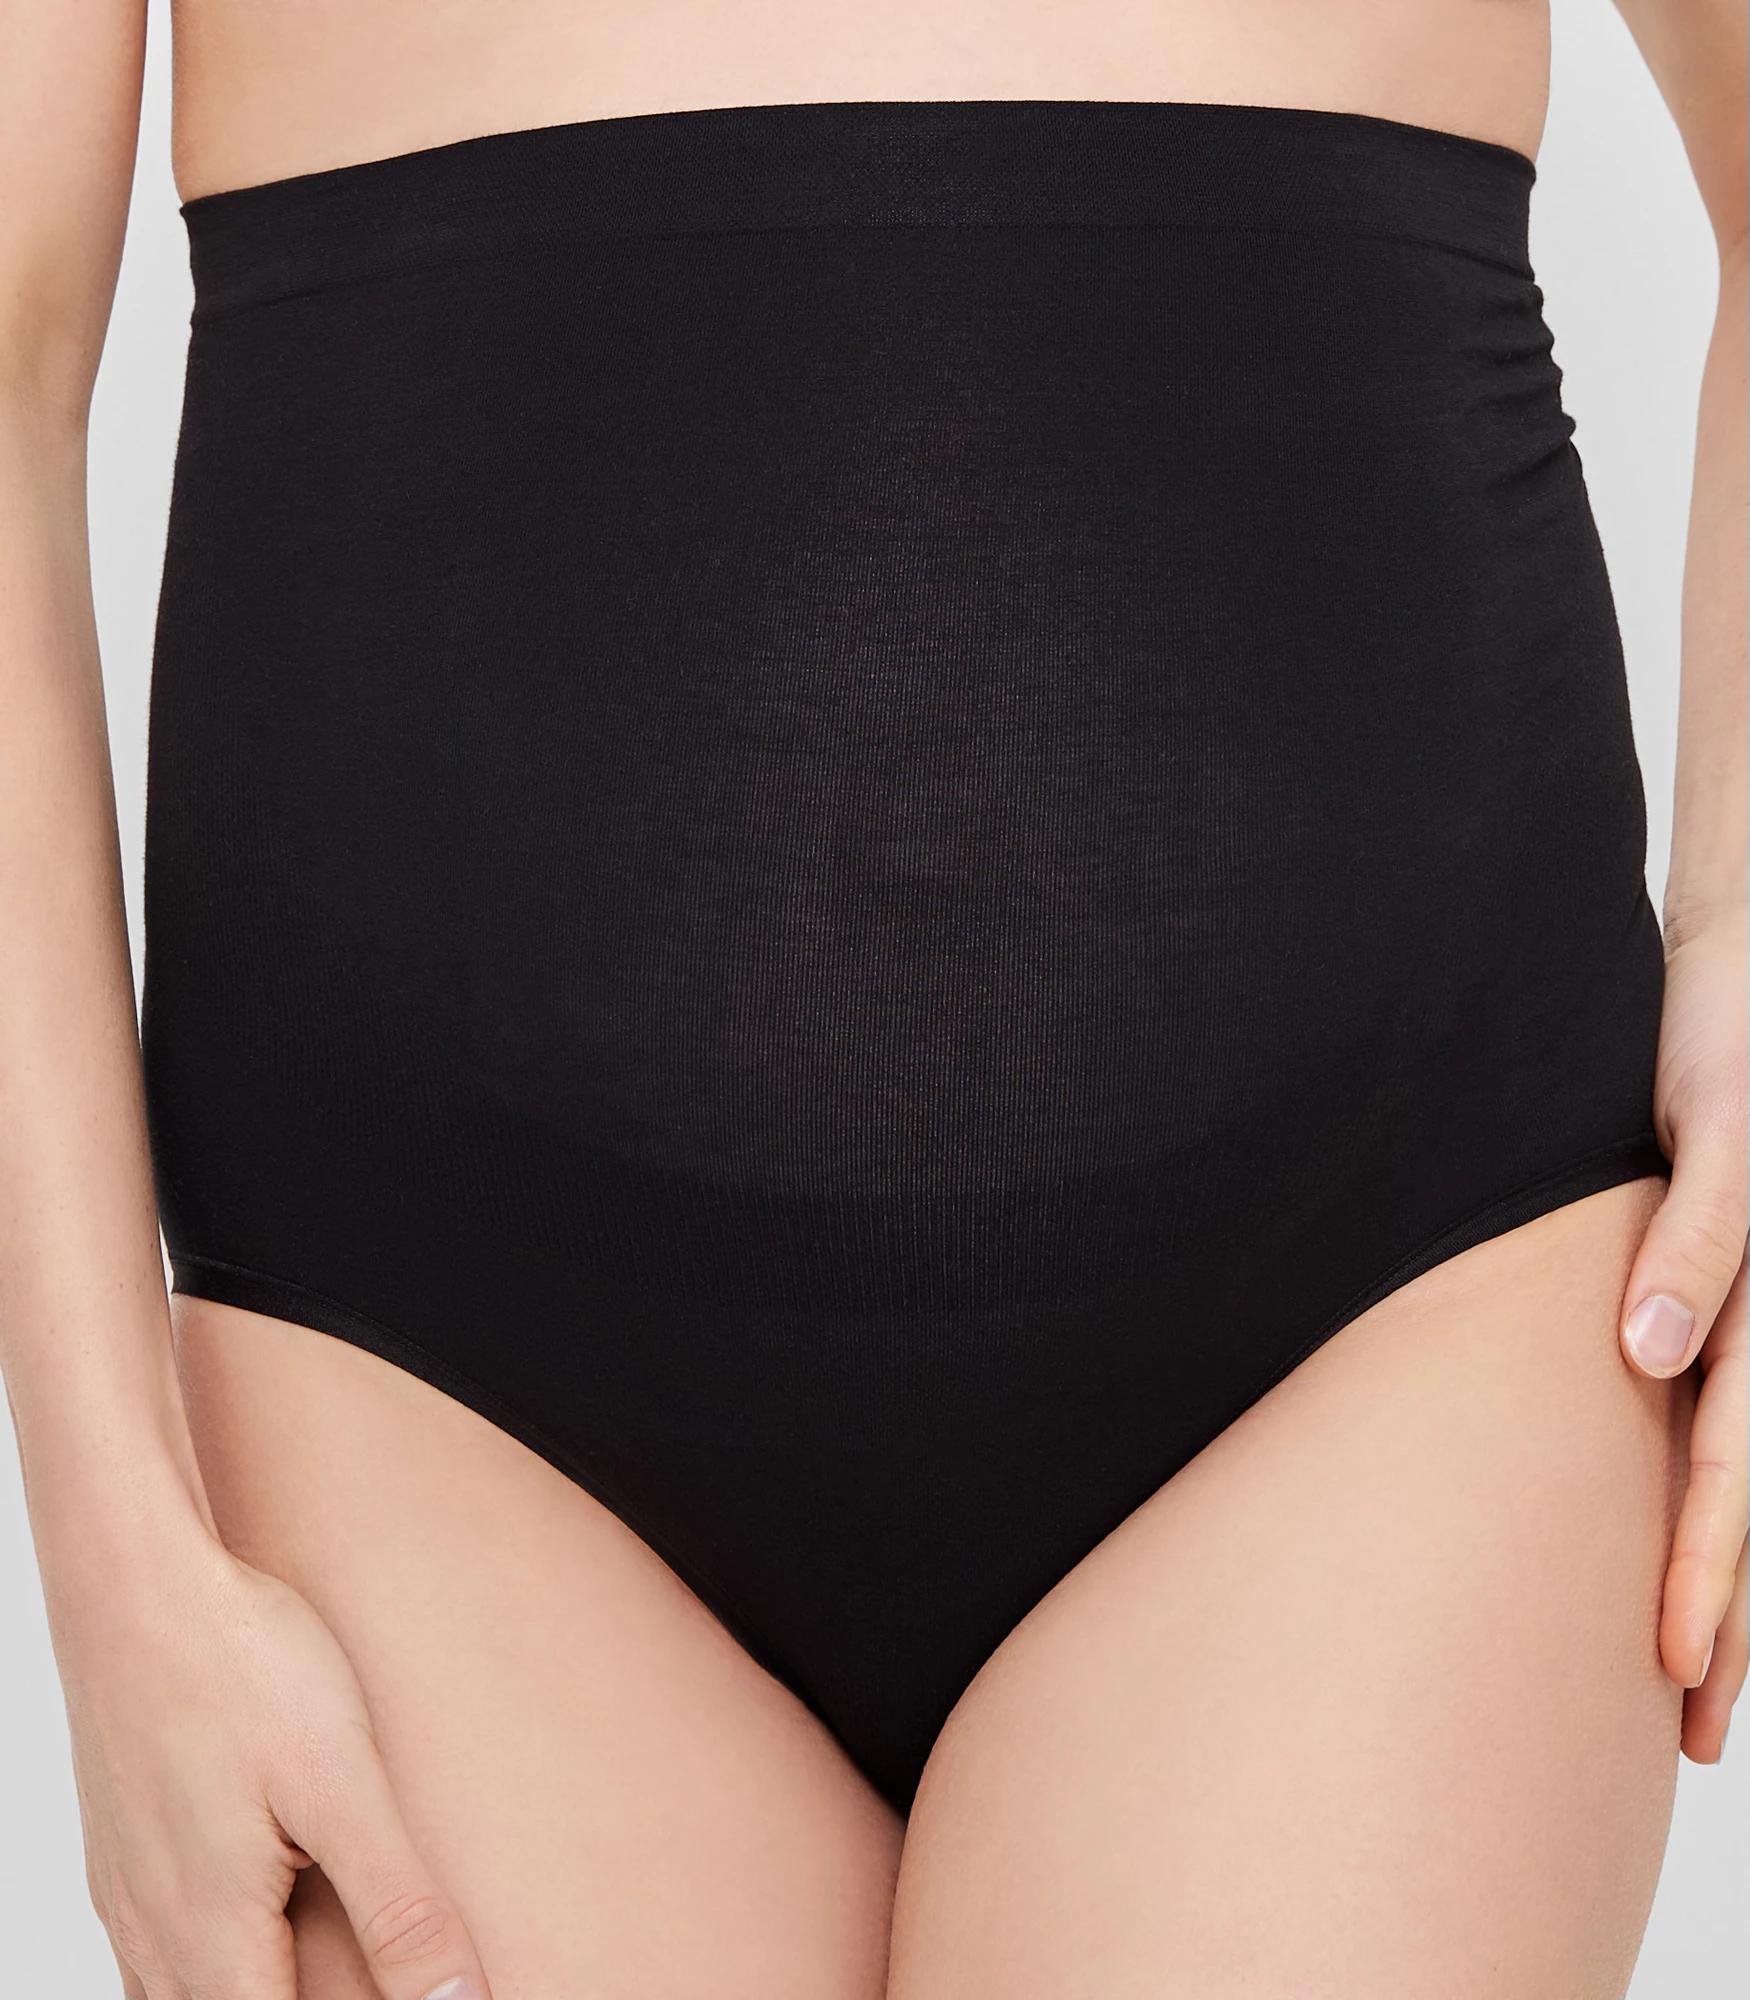 Pregnancy Tight Maternity Underwear Over The Belly - Black